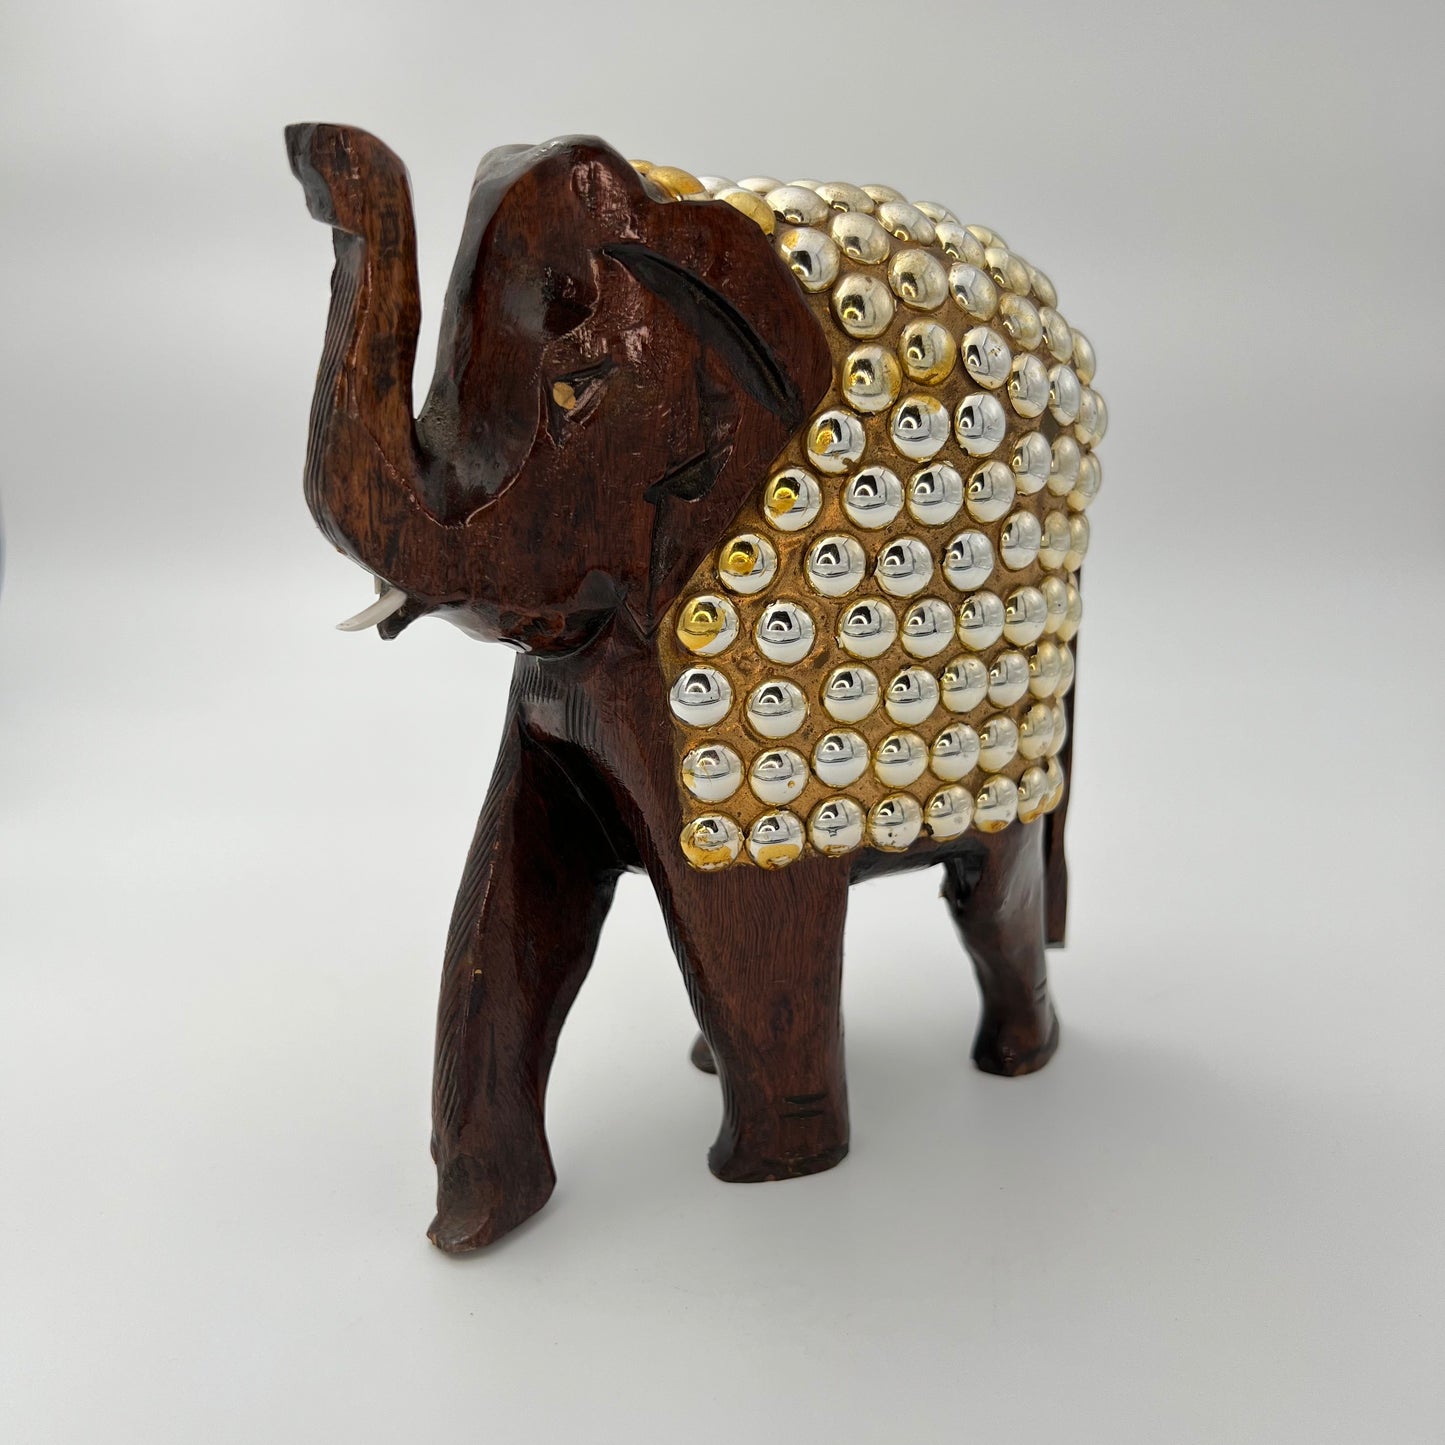 Image of Wooden Elephant with Gold Beads Work.  The Source India is an Indian Handicraft, Home Decor, Furnishing and Textiles Store. Our Mission is to allow the enhancement of India's Culture